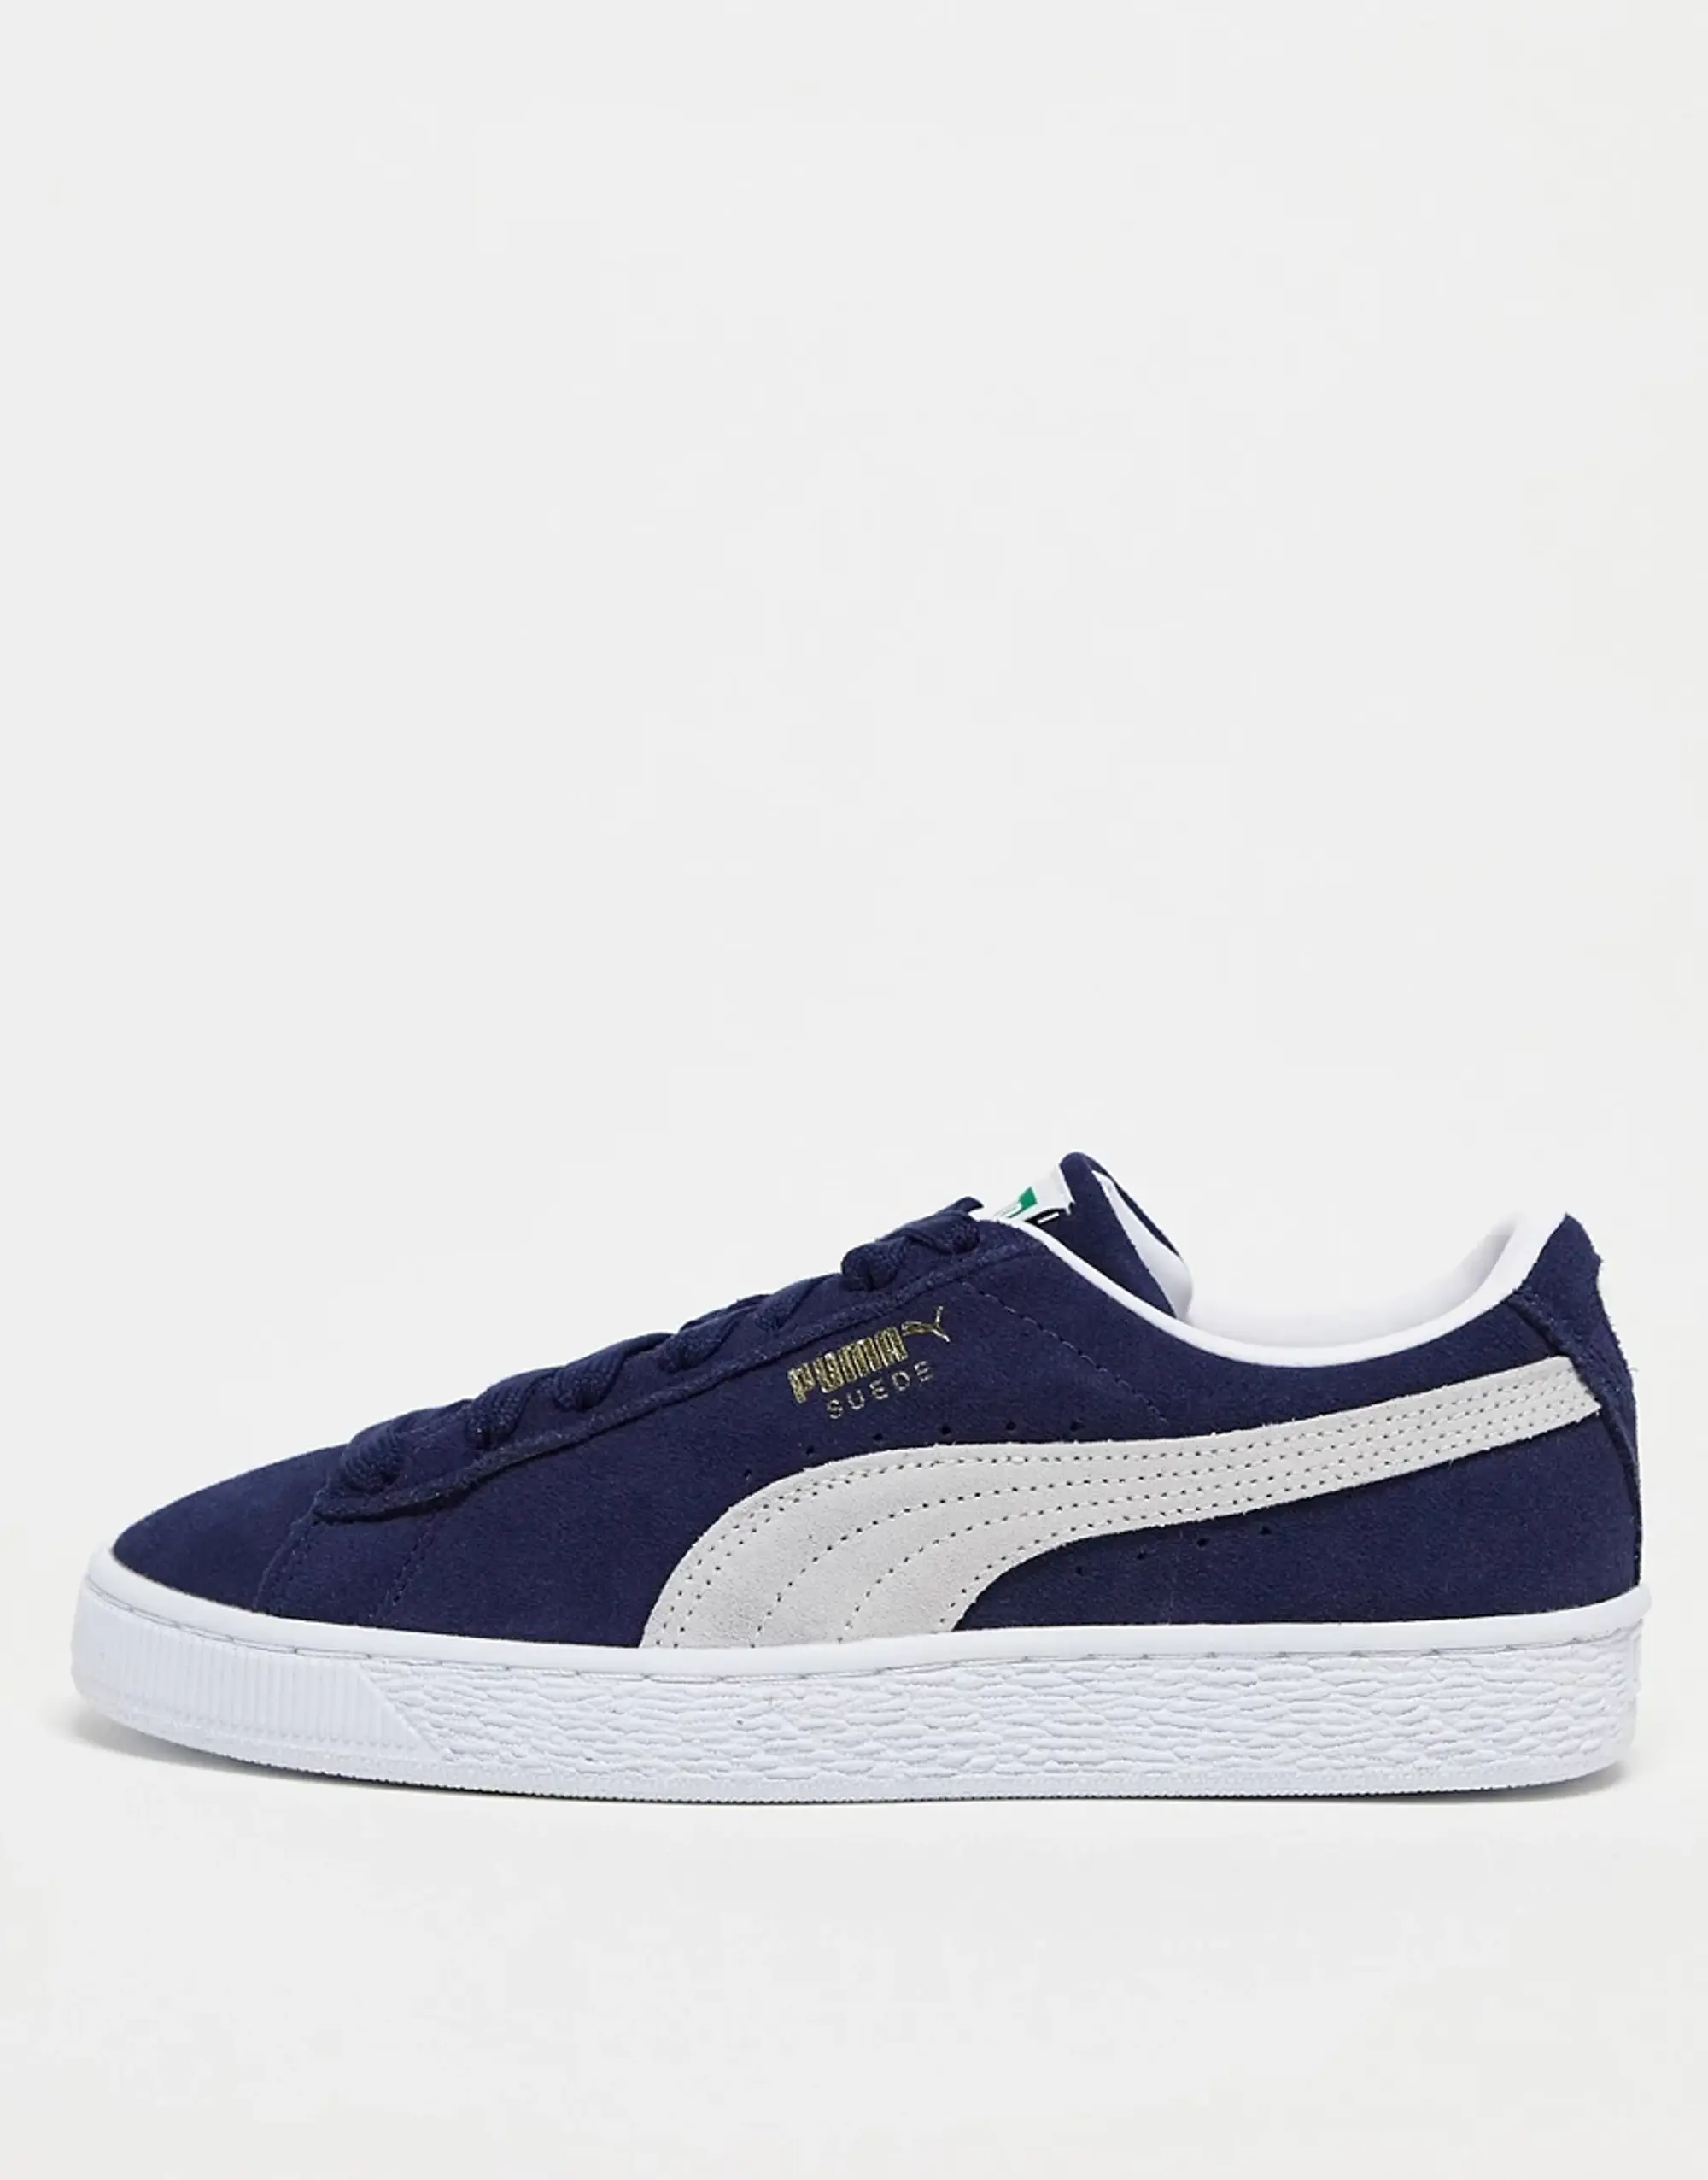 Puma Mens Suede Classic XXI Trainers - Navy Leather